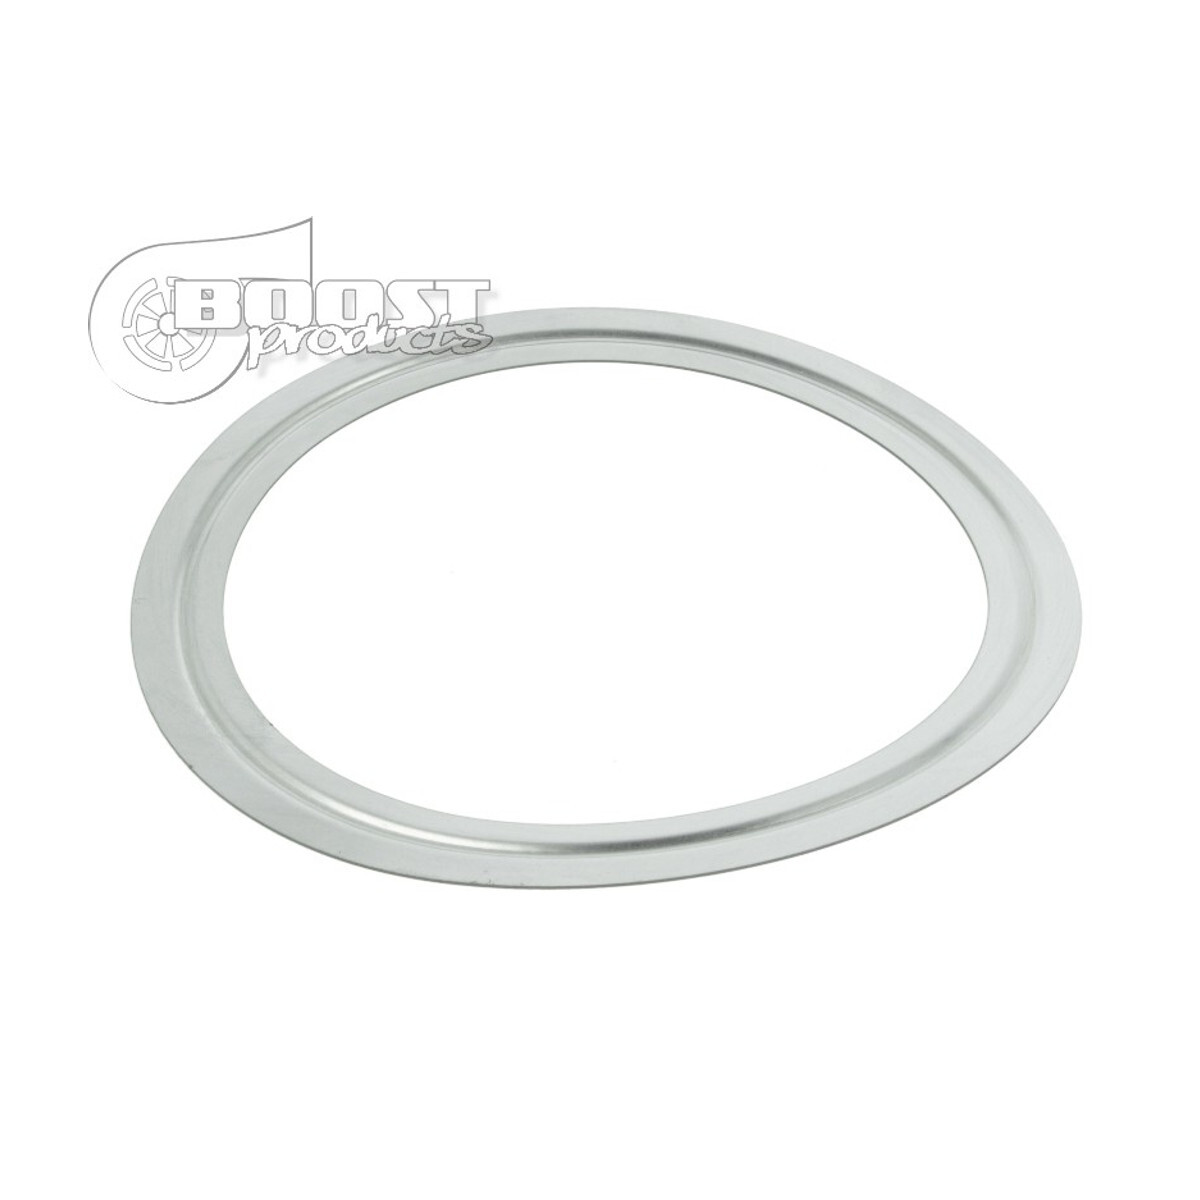 BOOST products Vband Gasket 76mm